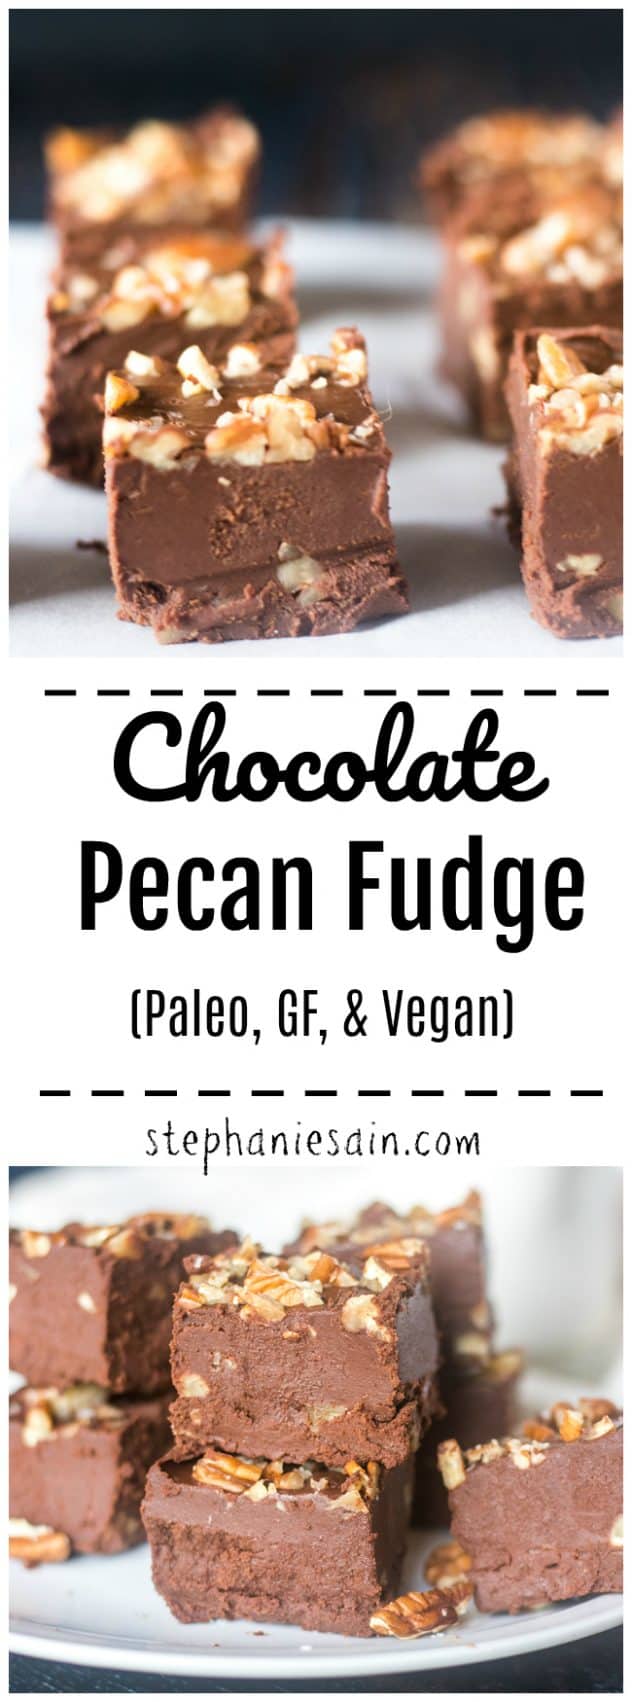 This Chocolate Fudge is rich creamy, and loaded with chocolatey flavor. Crunchy pecans added to the fudge making it a perfect treat for the holidays or anytime. Super easy to make with less then 10 minutes prep. Vegan, Paleo, GF and No added refined sugars.